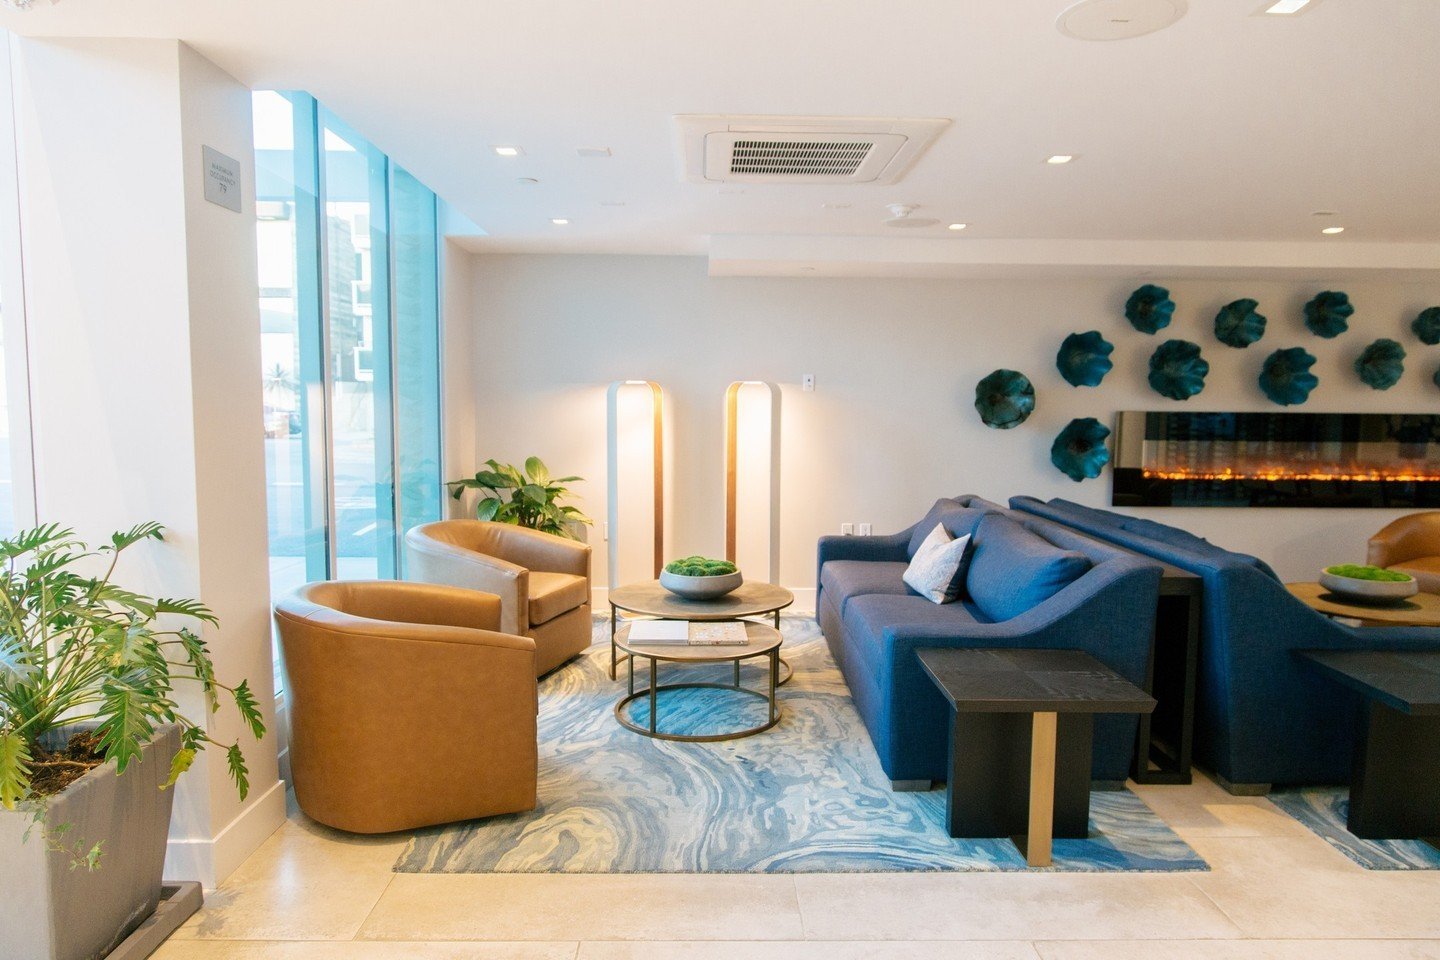 H2O lobby appreciation post 💙 Cozy up on our fireside couches with a book, play a round of cards at our coffee tables, or catch up on work in a new environment.